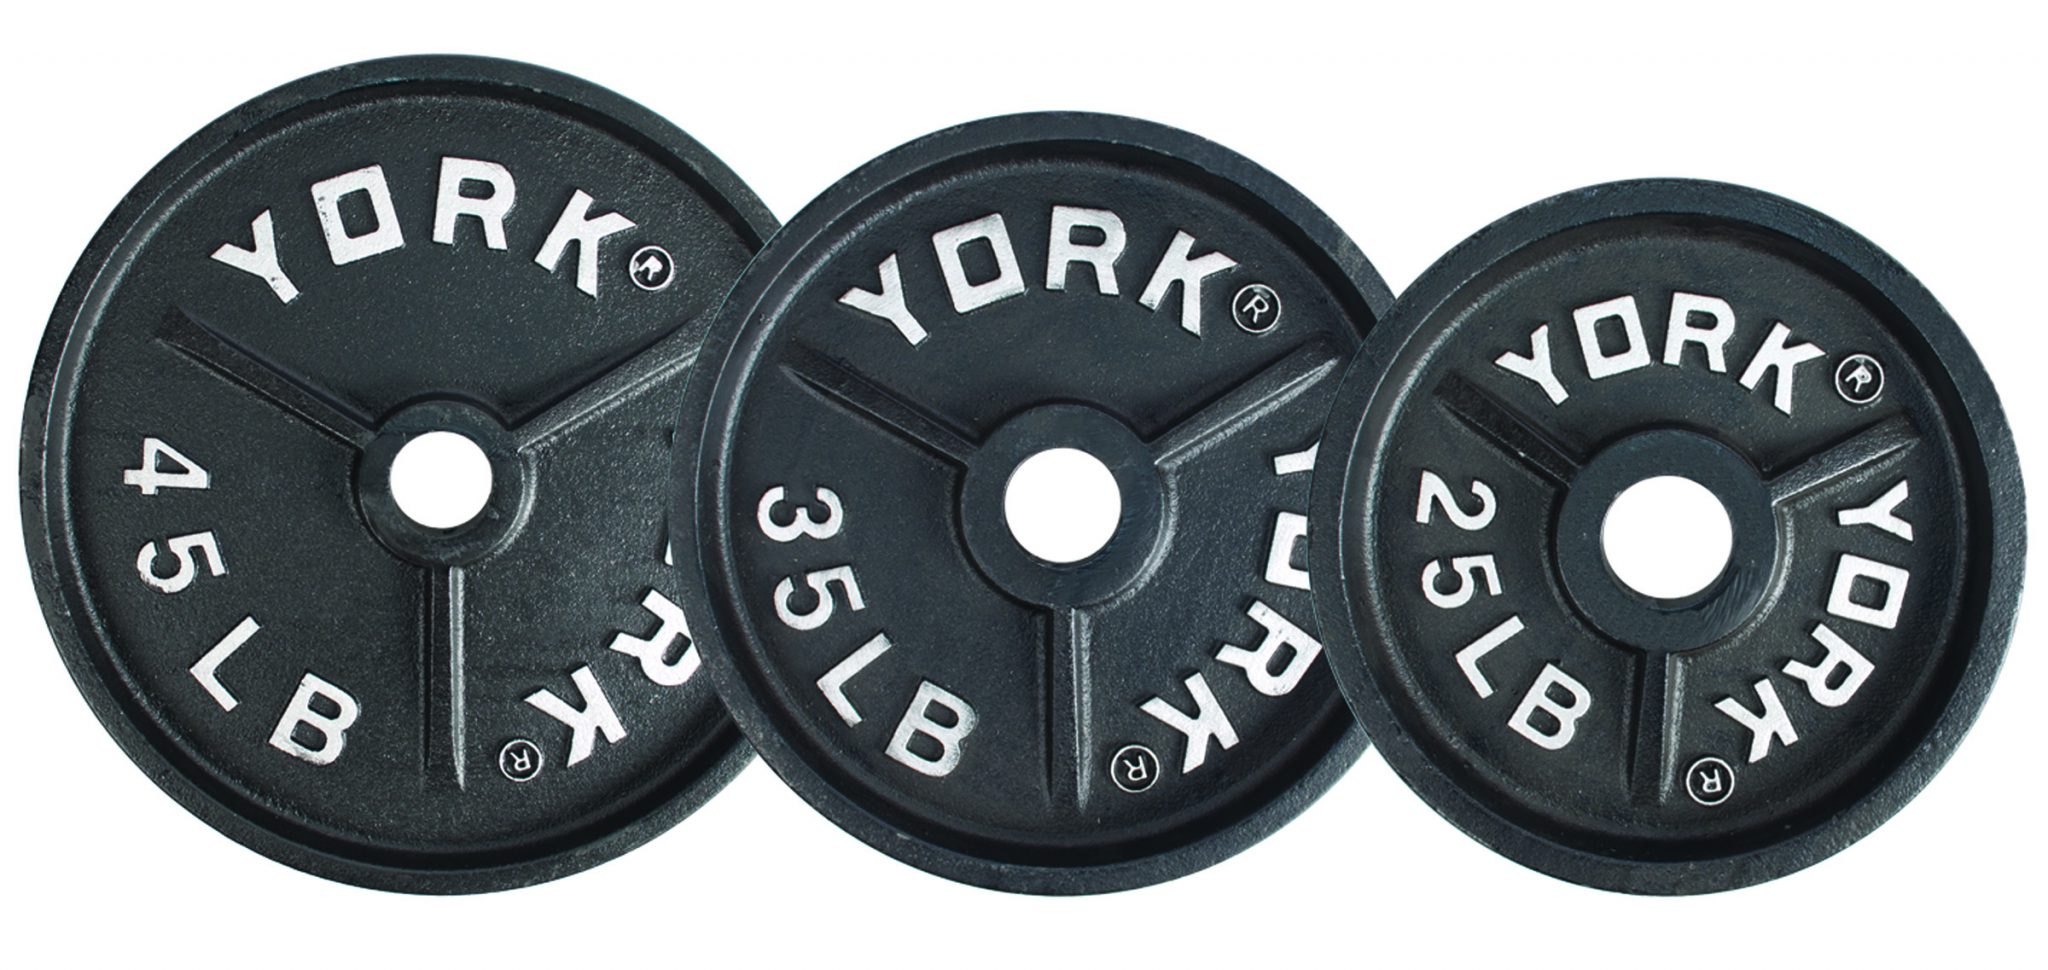 2 35 lb Olympic Weight Plates.PAIR OF FITNESS GEAR 35 LB OLYMPIC GRIP PLATES. 